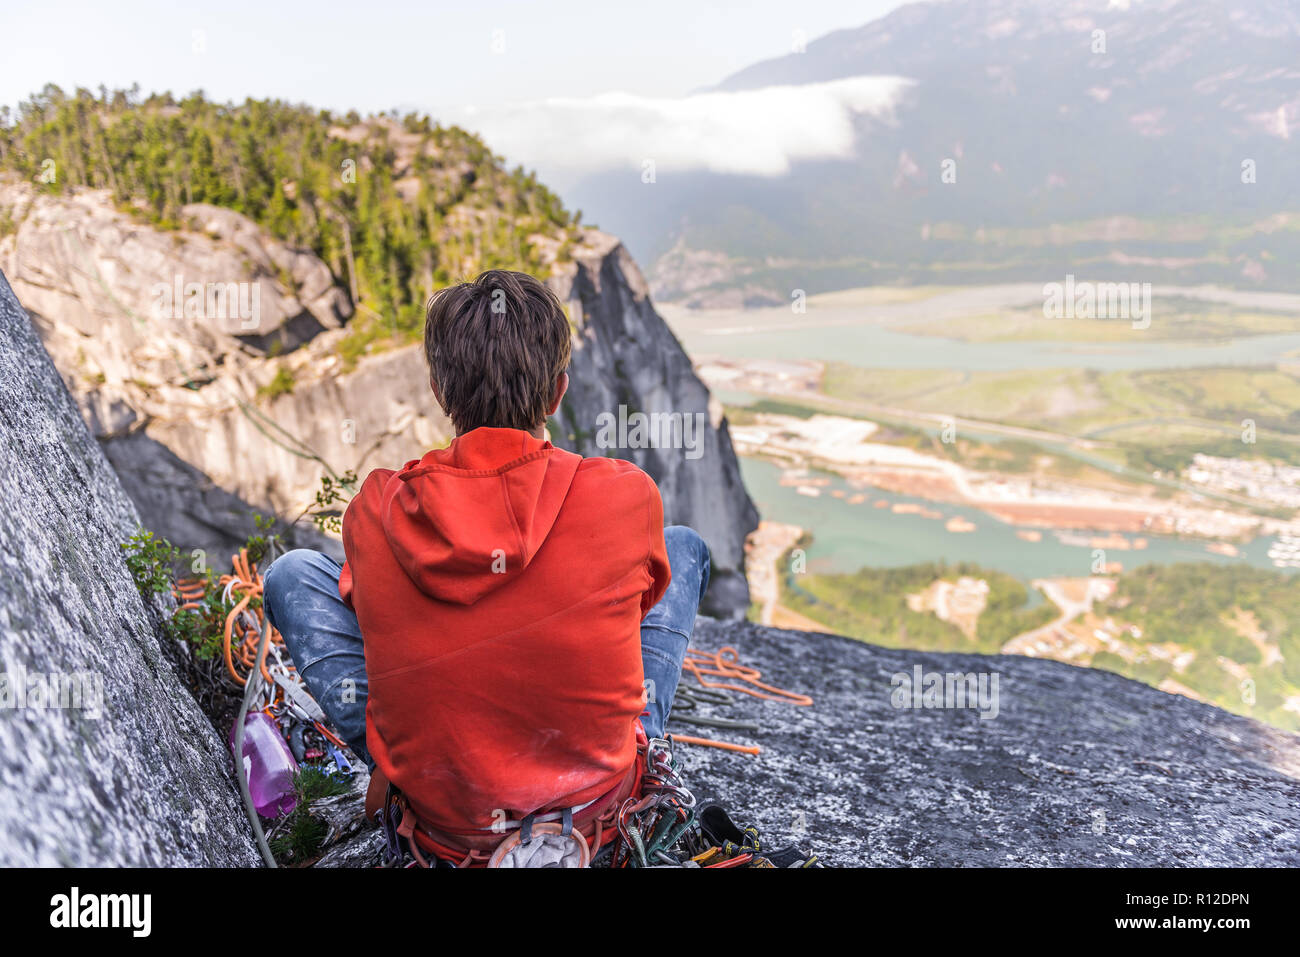 Rock climber relaxing at top of rock, Squamish, Canada Stock Photo